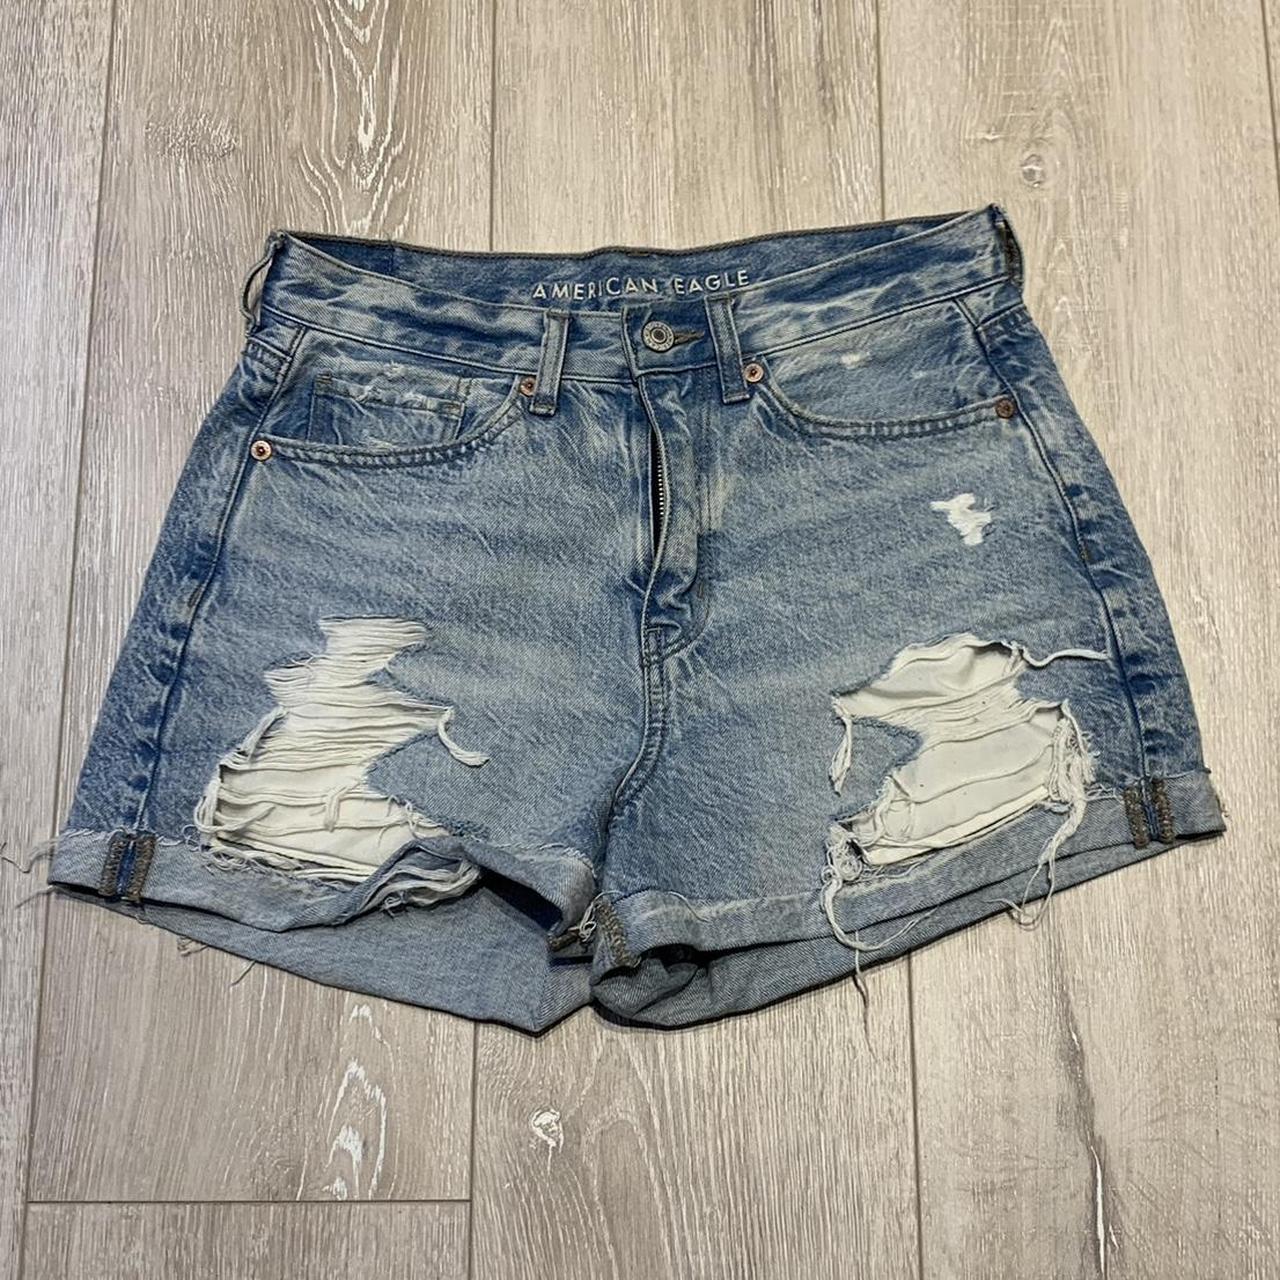 american eagle jean shorts repop! too small for me - Depop